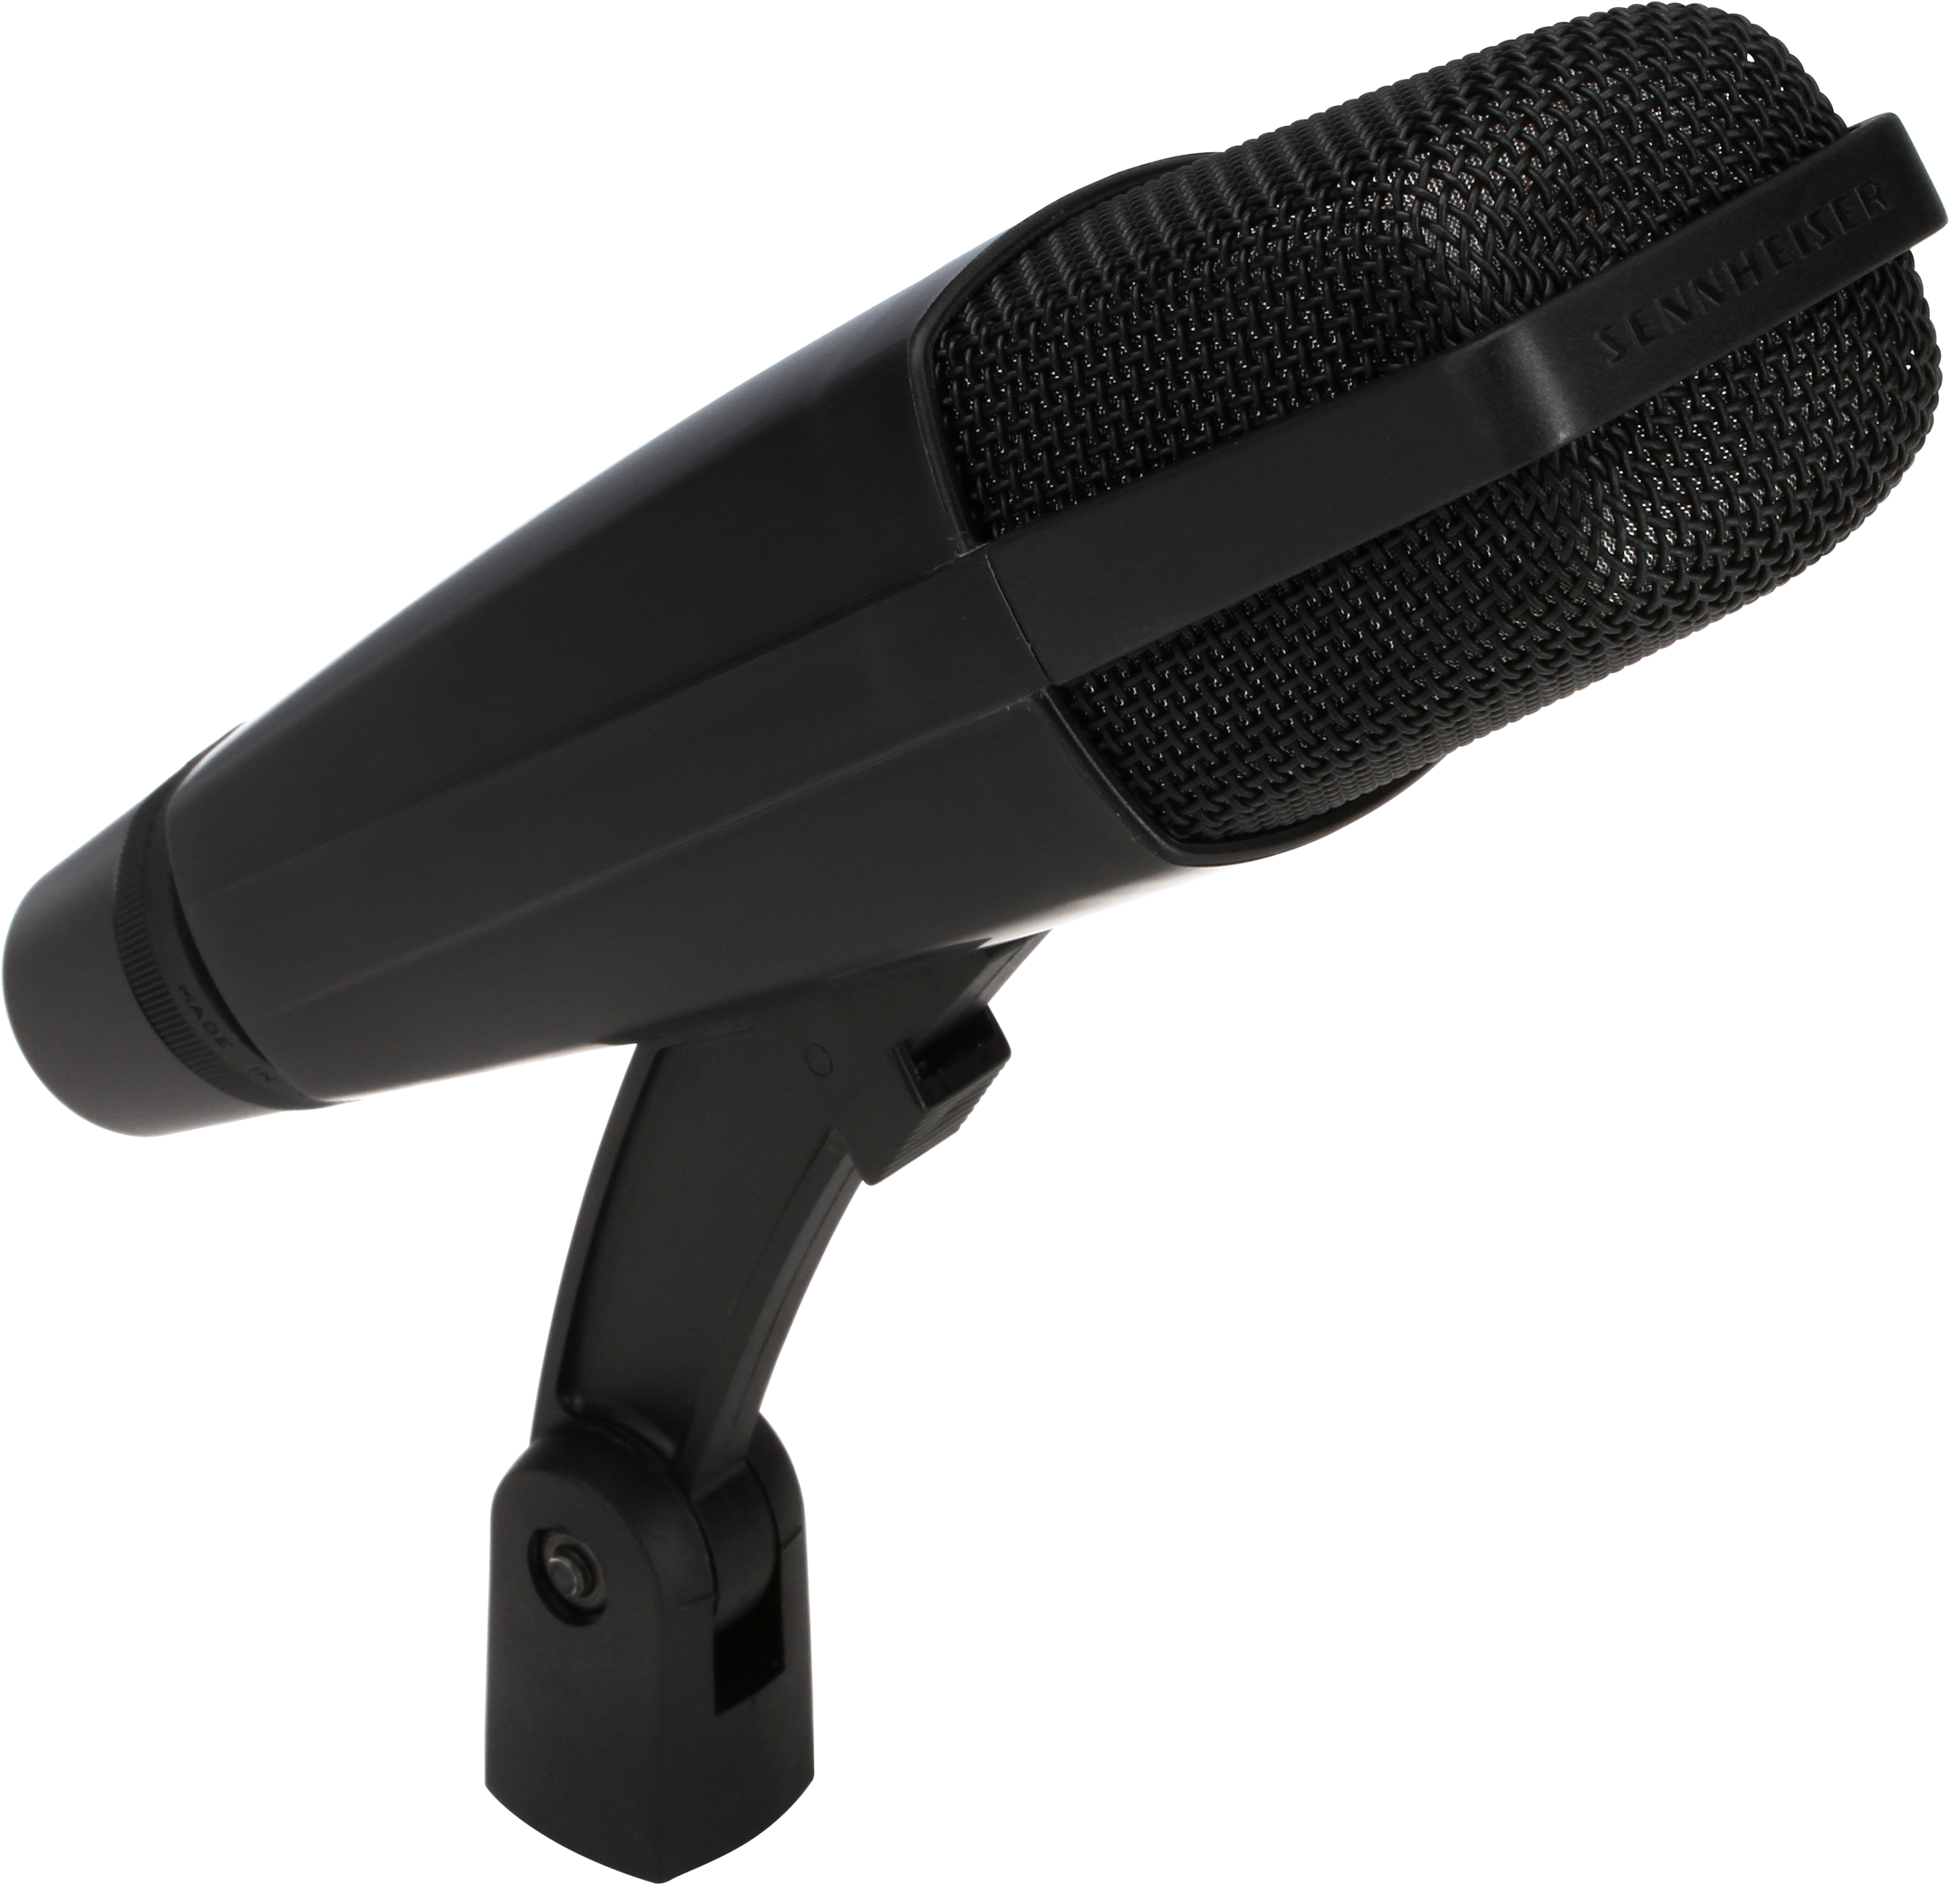 Mercase Professional USB Condenser Microphone, Full Metal Reverb  Noise-canceling Microphone, Plug And Play, Headphone Output And Volume  Control, Micro